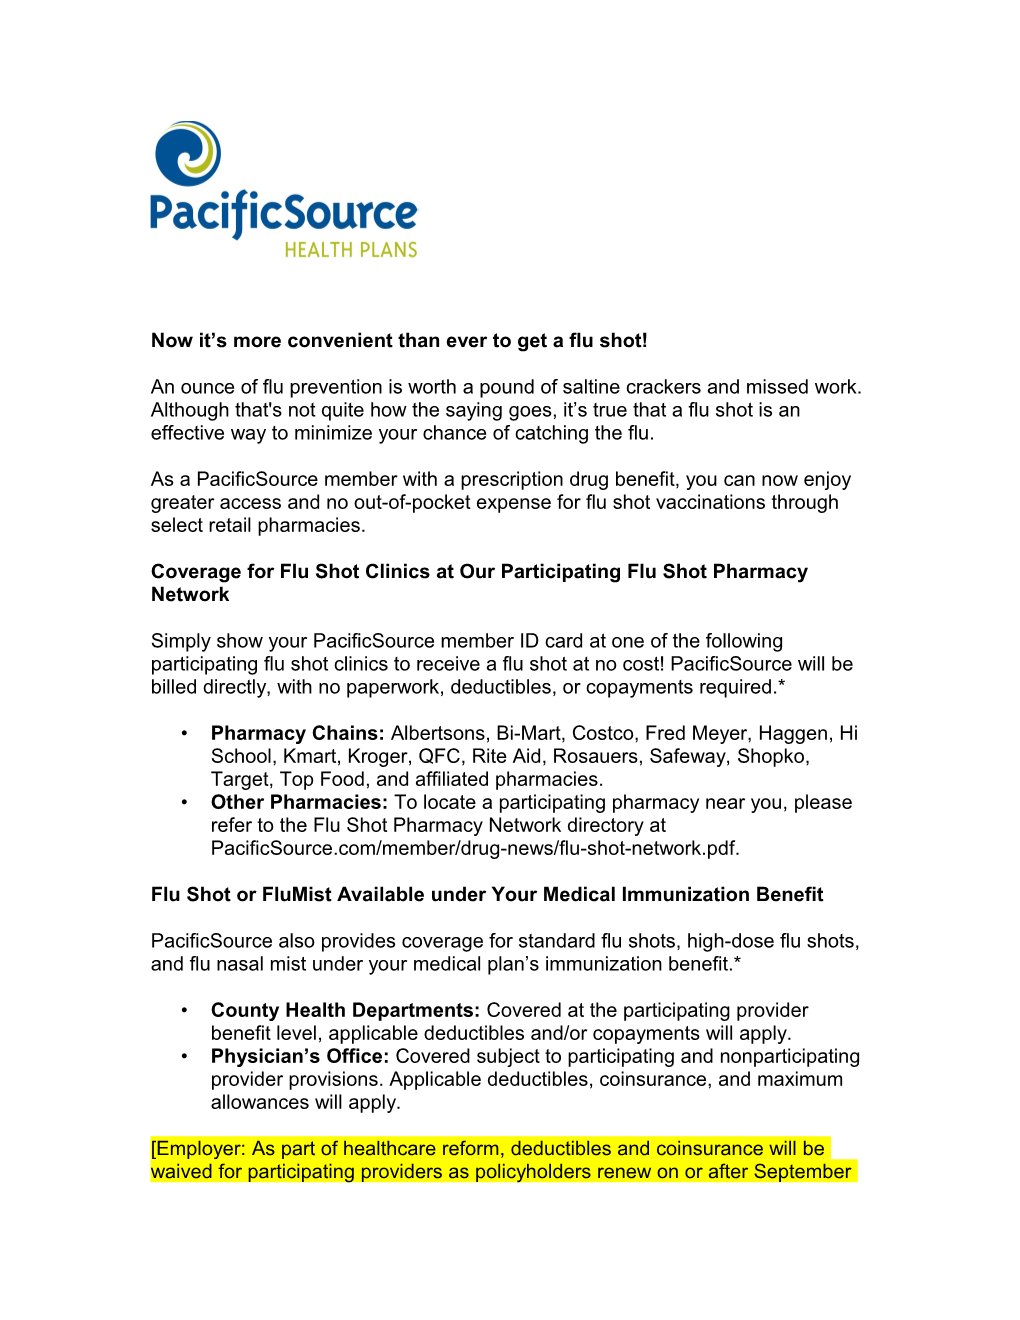 Thank You for Your Interest in Wellness Tools from Pacificsource Health Plans